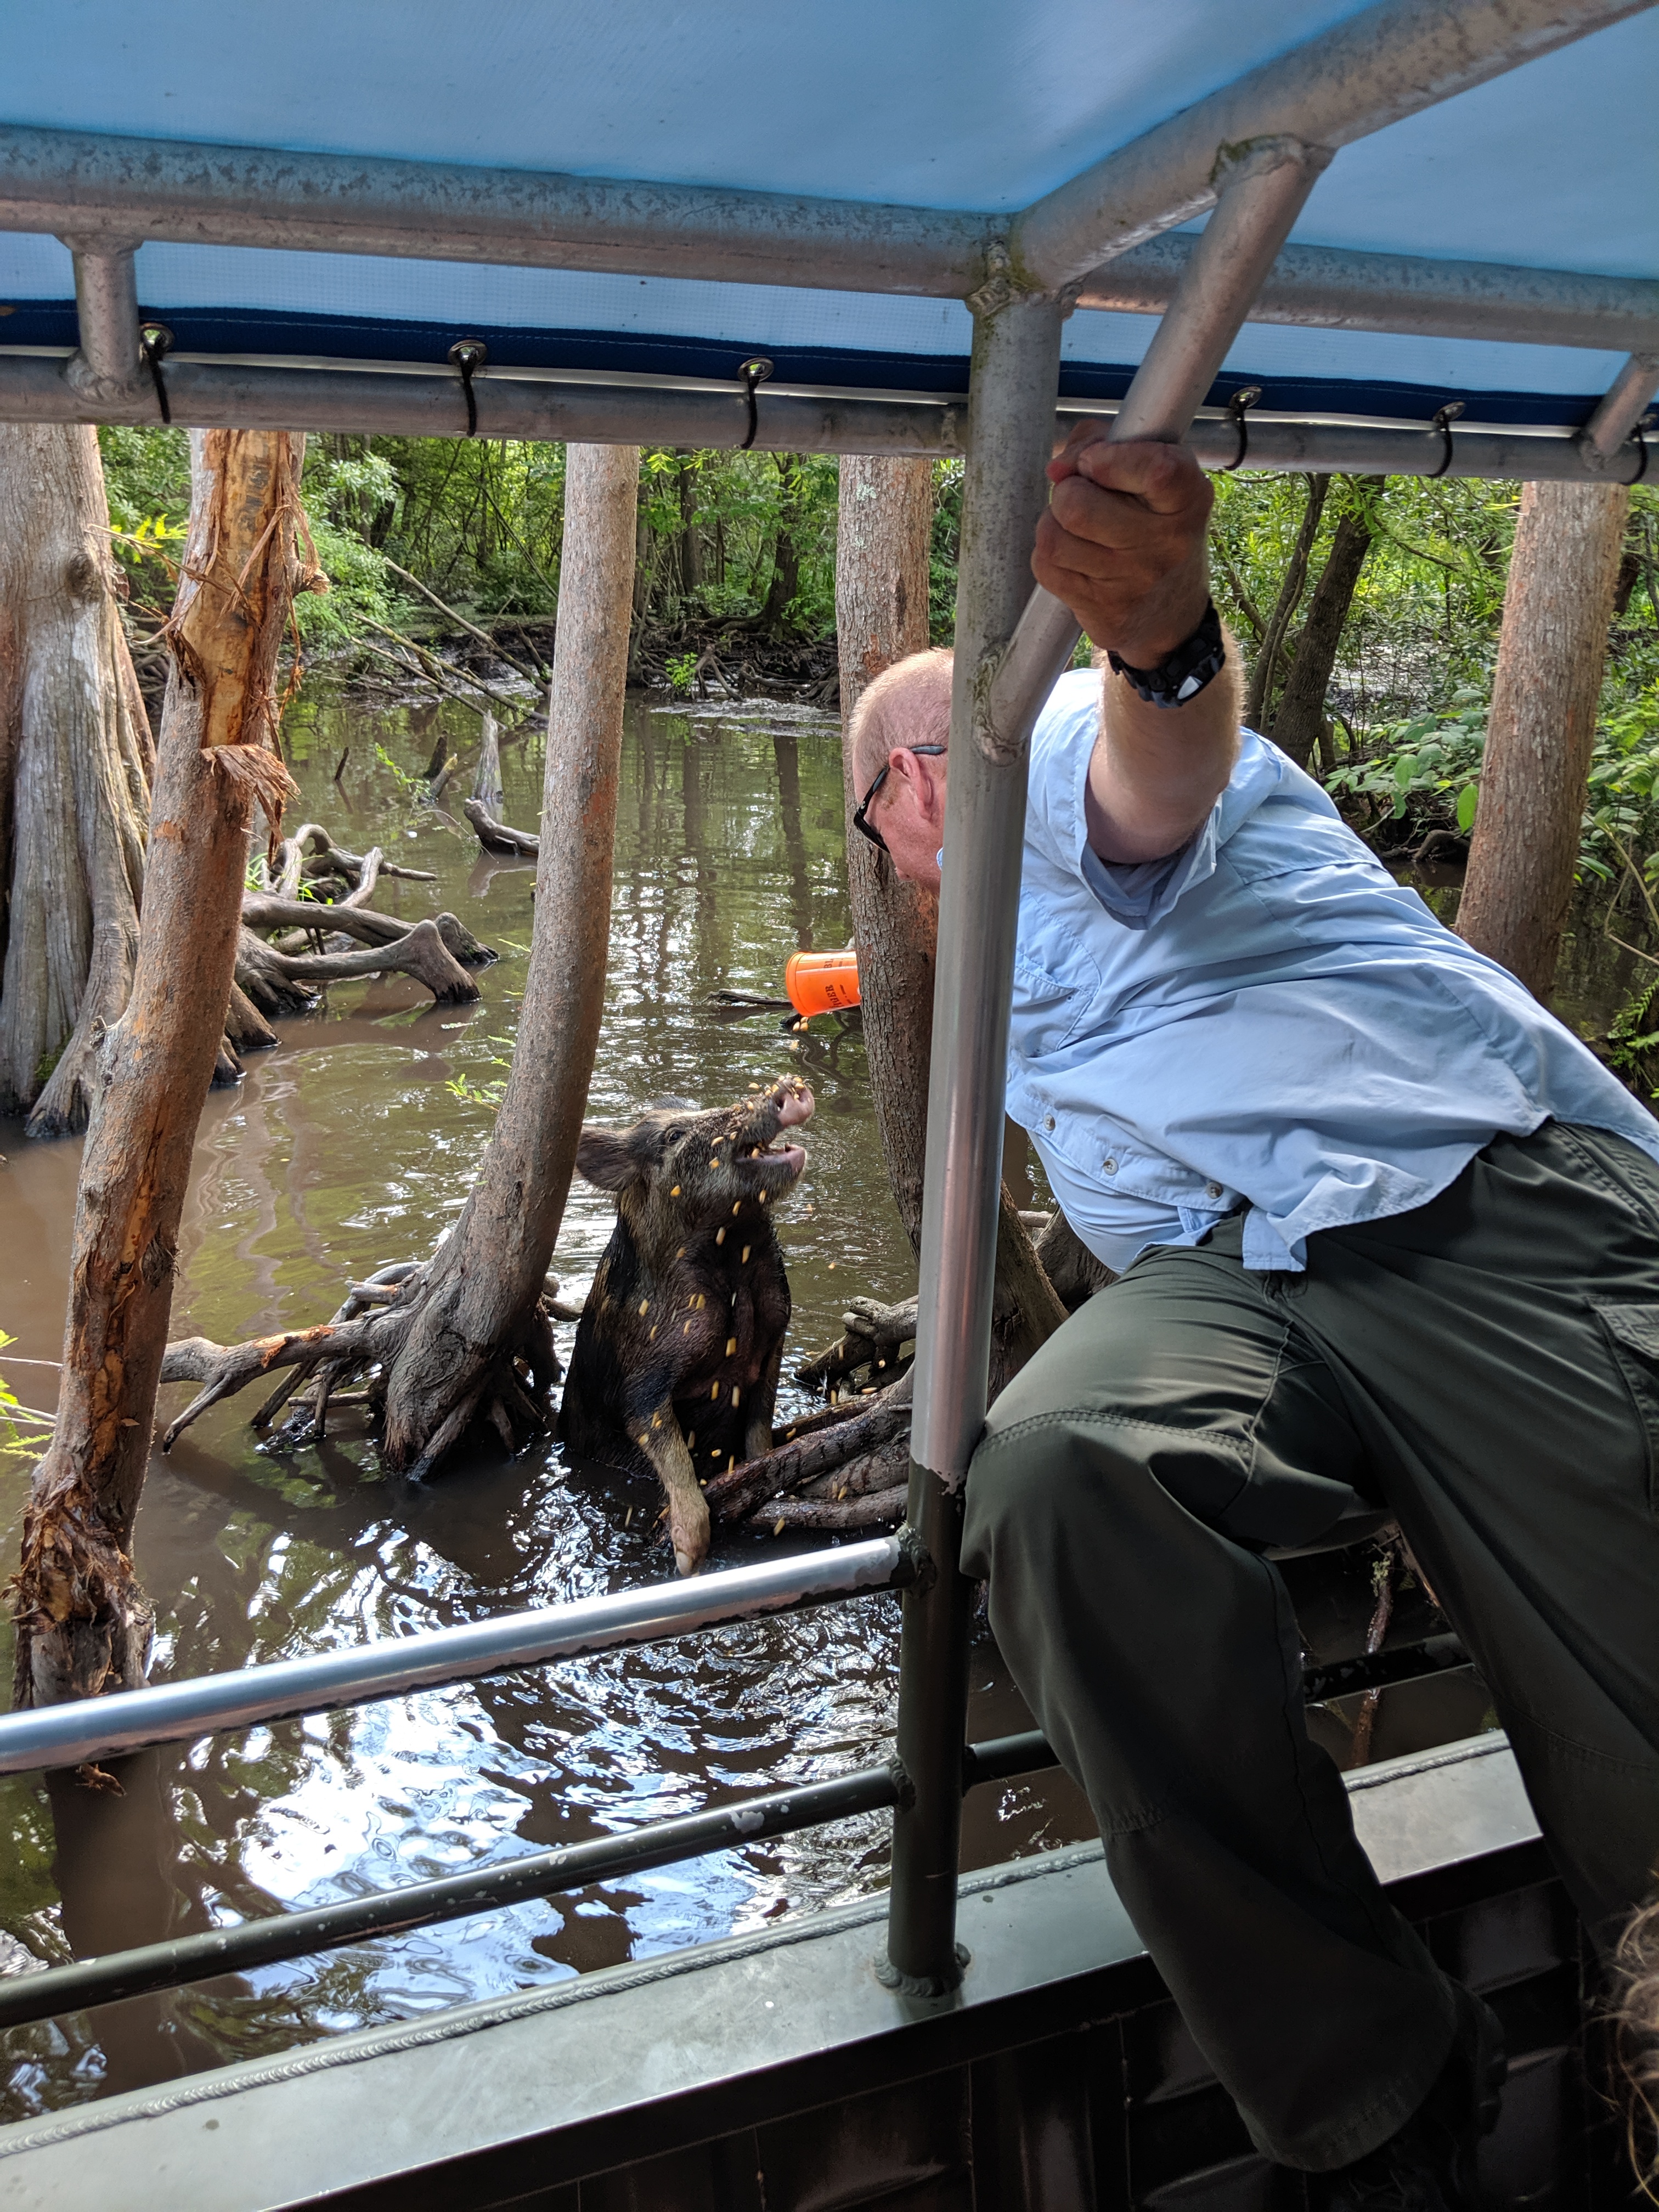 A man in a blue shirt leaning out of a boat in a swamp to feed a wild pig from an orange cup